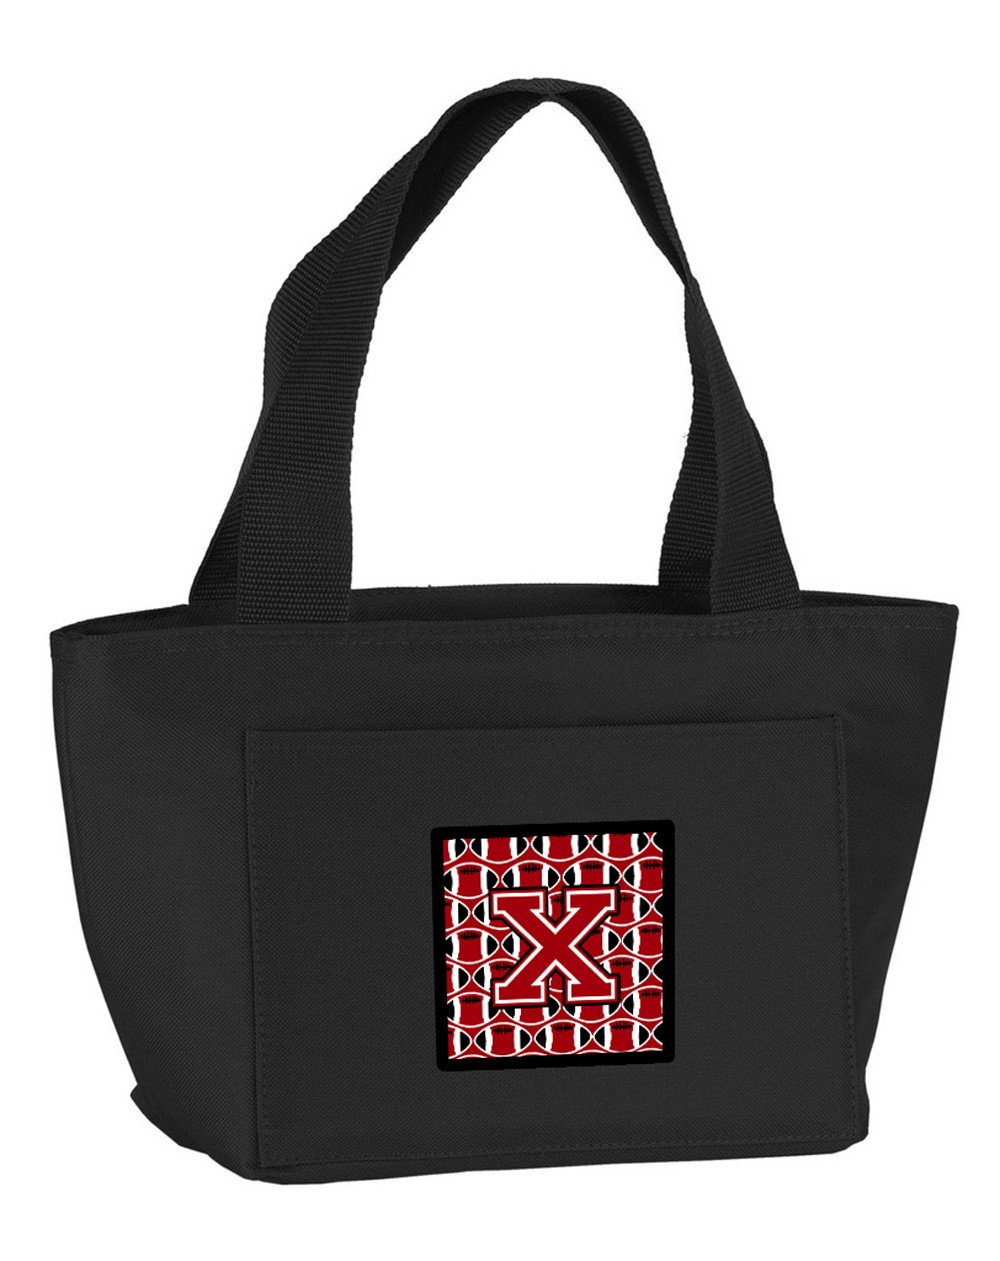 Letter X Football Red, Black and White Lunch Bag CJ1073-XBK-8808 by Caroline's Treasures